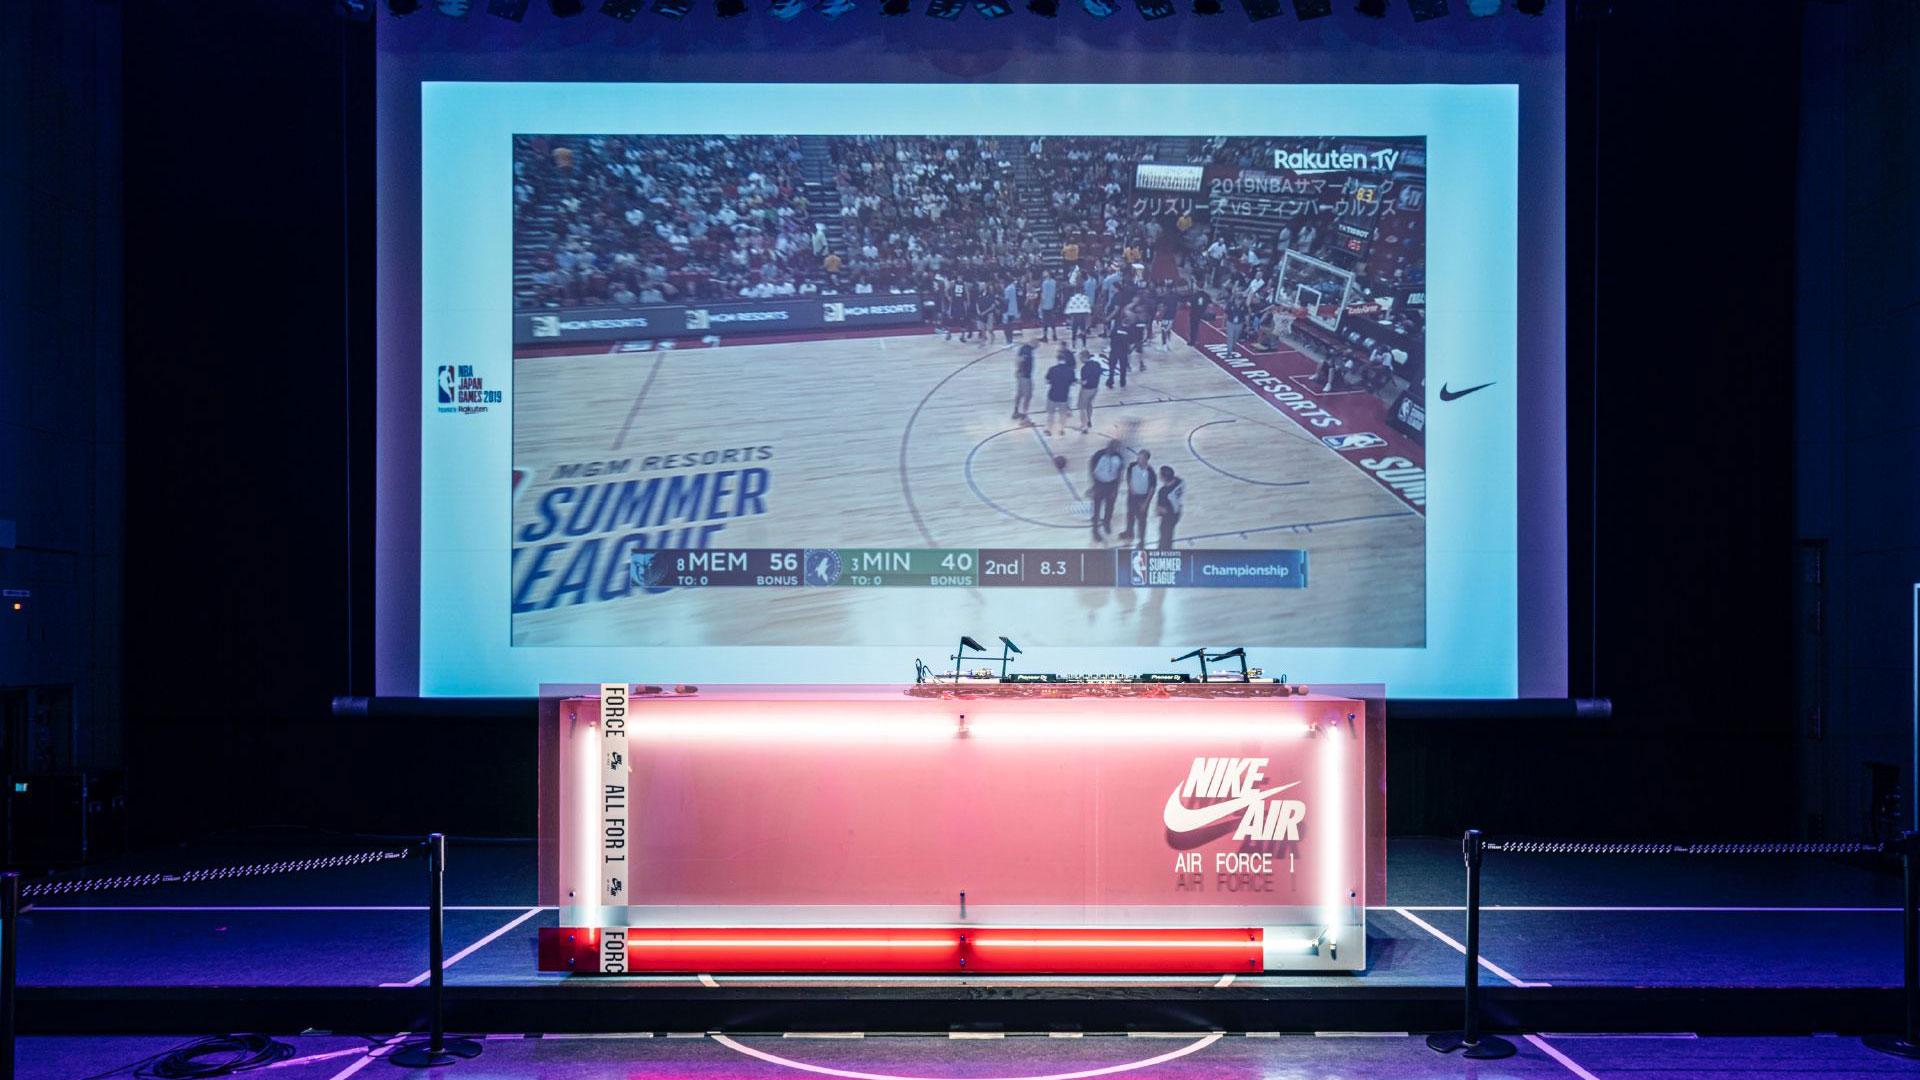 NBA JAPAN GAMES 2019 Presented by Rakuten LIVE VIEWING PARTY at 渋谷